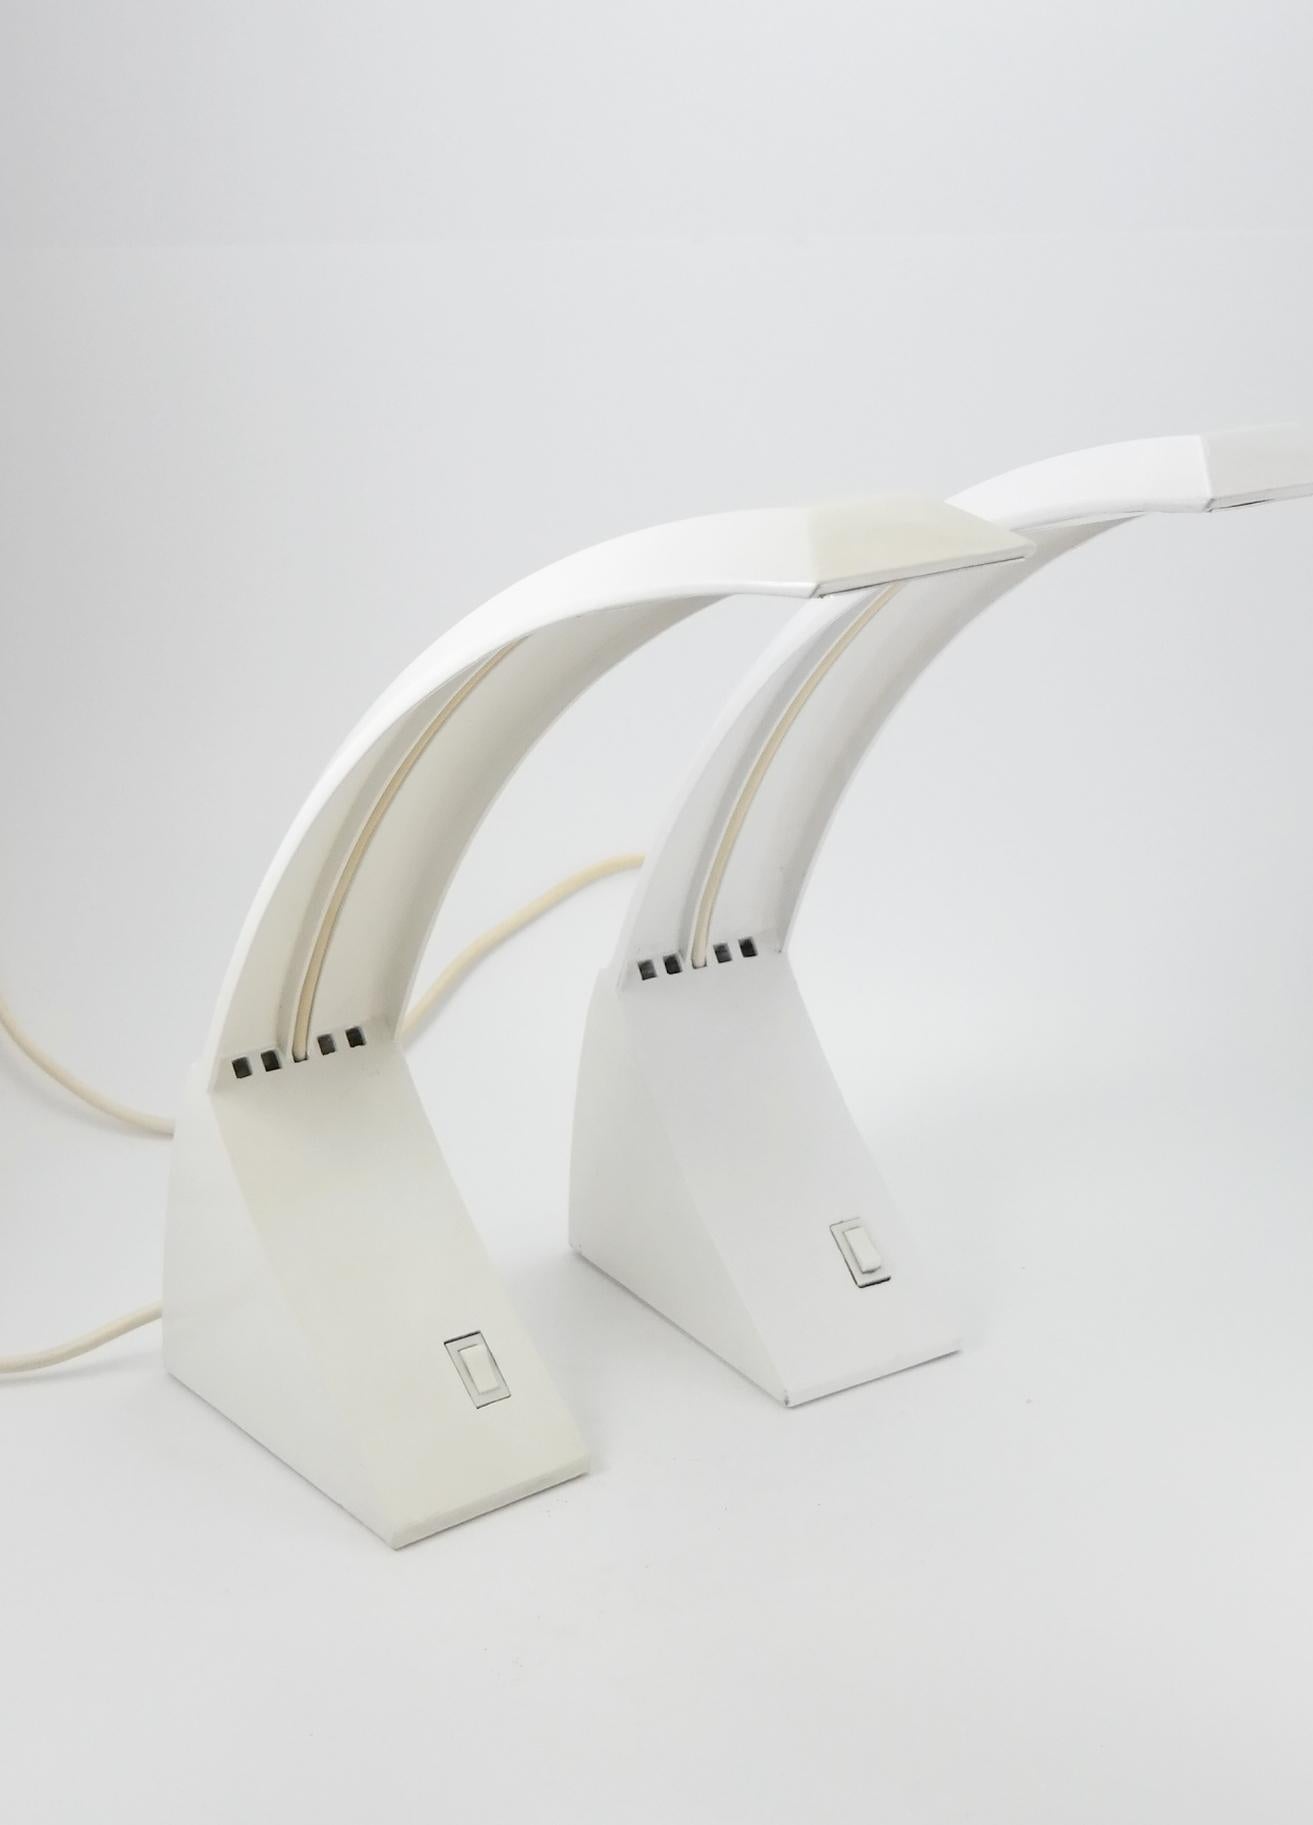 Pair of Late 20th Century Modern White Table / Desk Lamps, 1980s For Sale 7